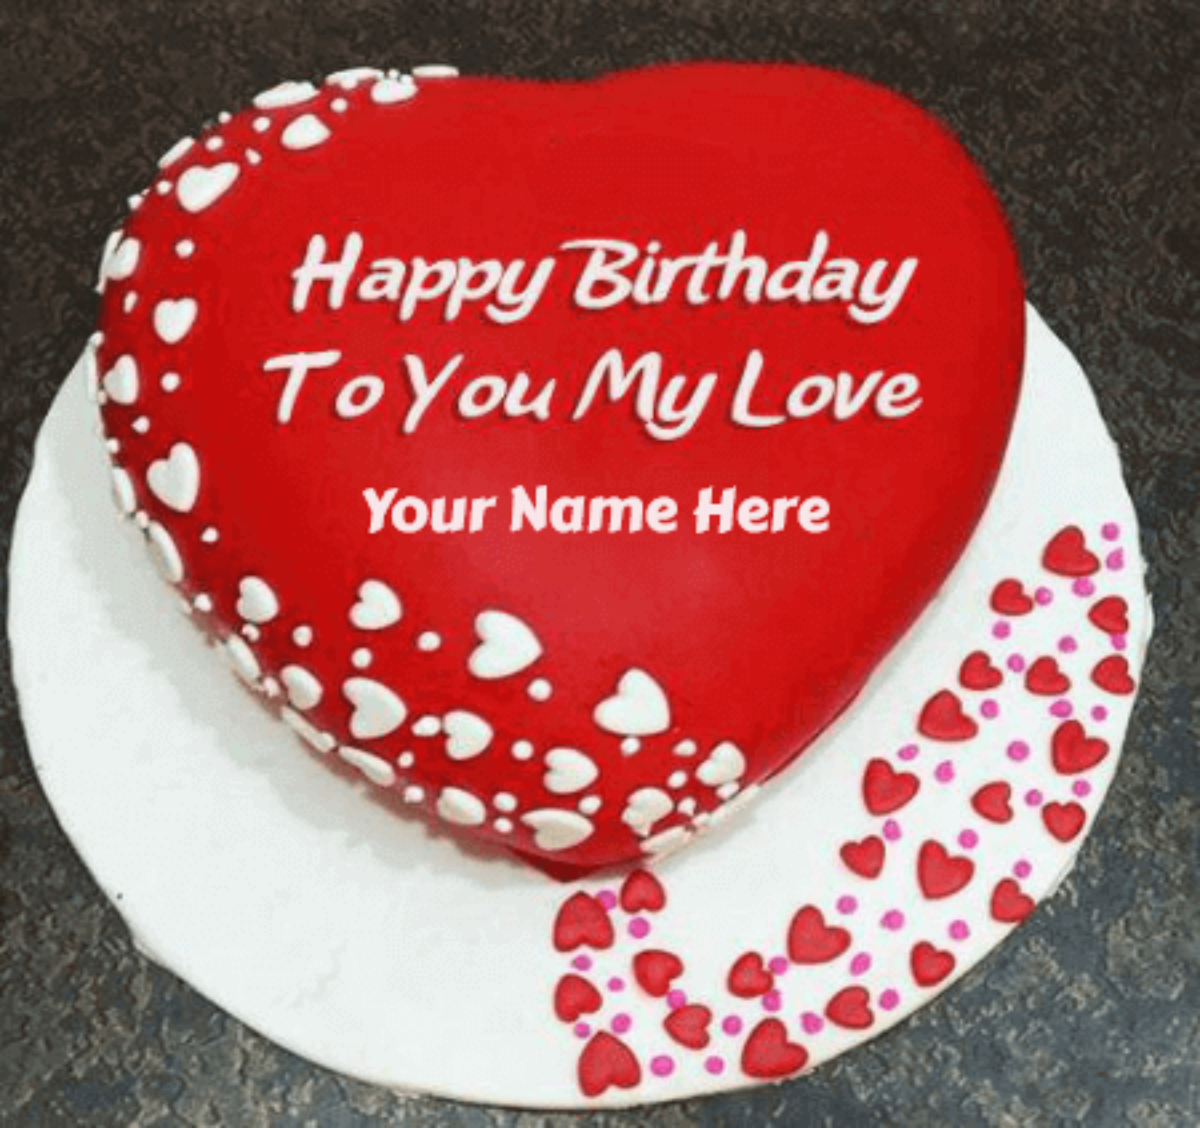 Lovers Birthday Cake With Hearts - Unique Beautiful Cake with Name